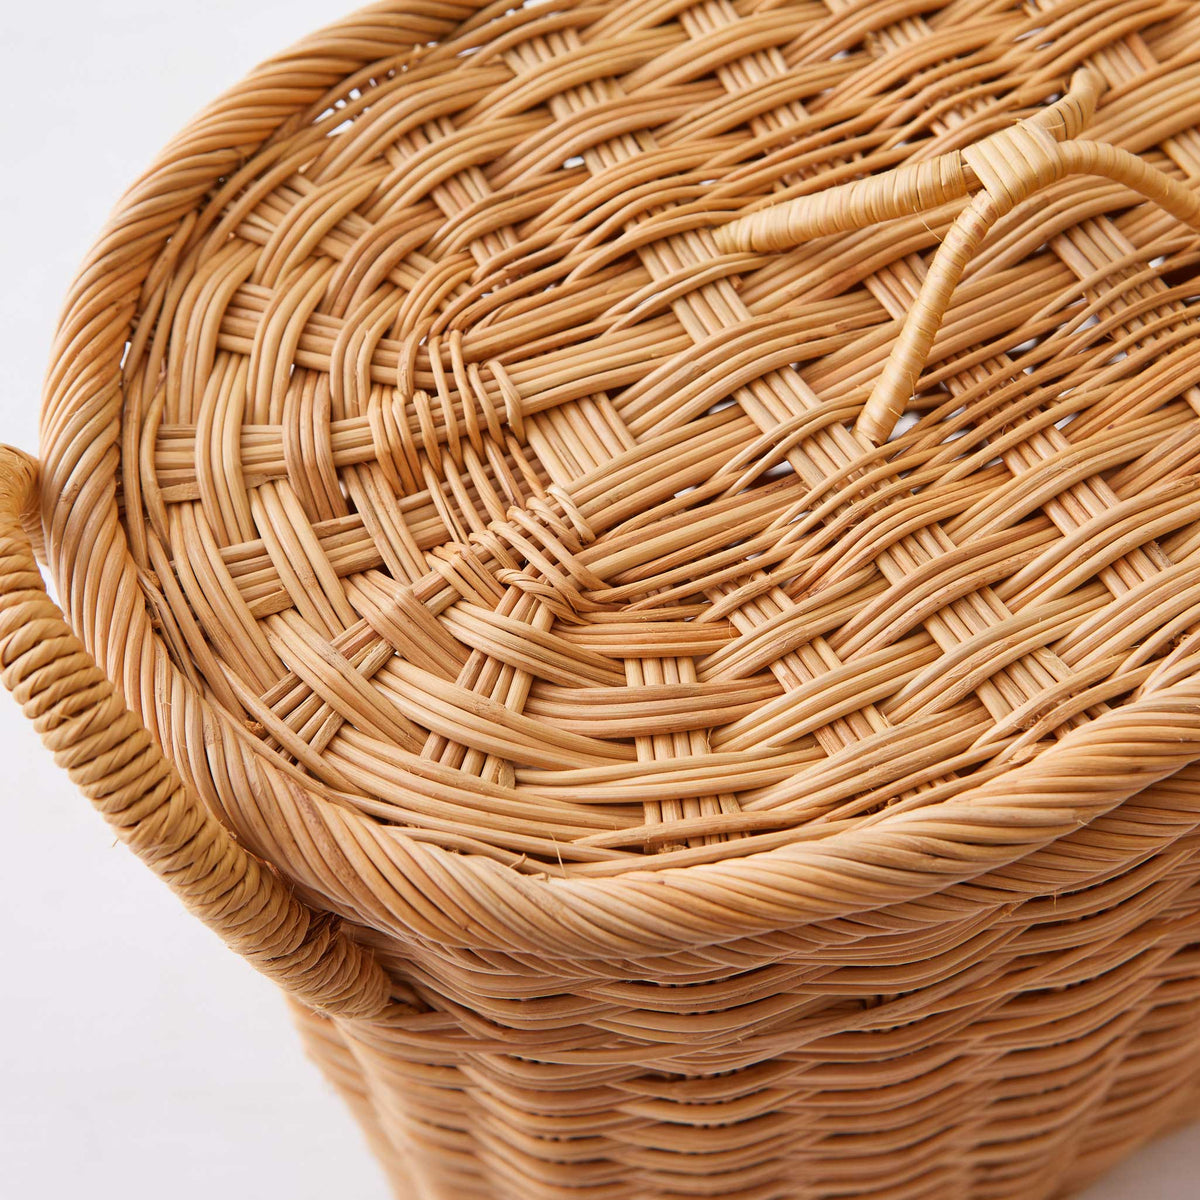 Oval rattan storage baskets with lids and handles. Perfect baskets for clothes, bathroom storage baskets, or baskets for shelves. XL, L, M, S, XS.